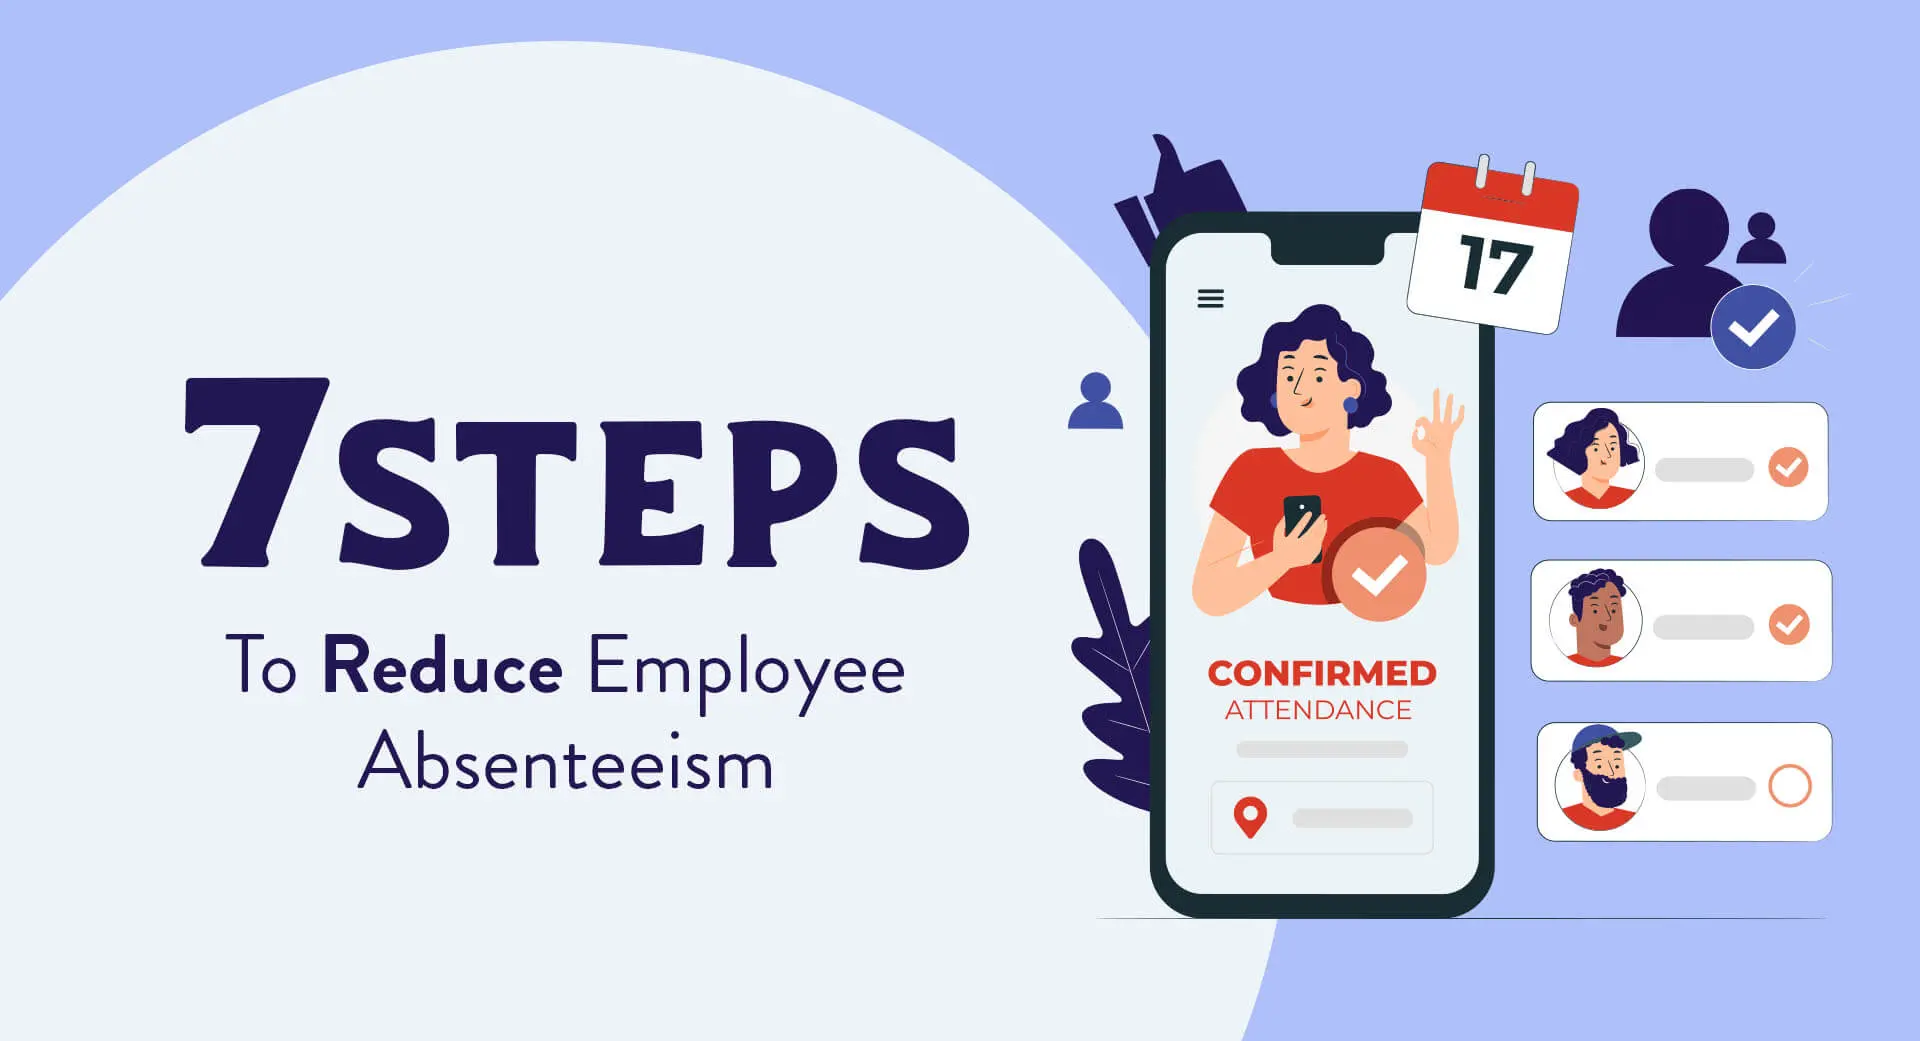 7 Steps To Reduce Employee Absenteeism